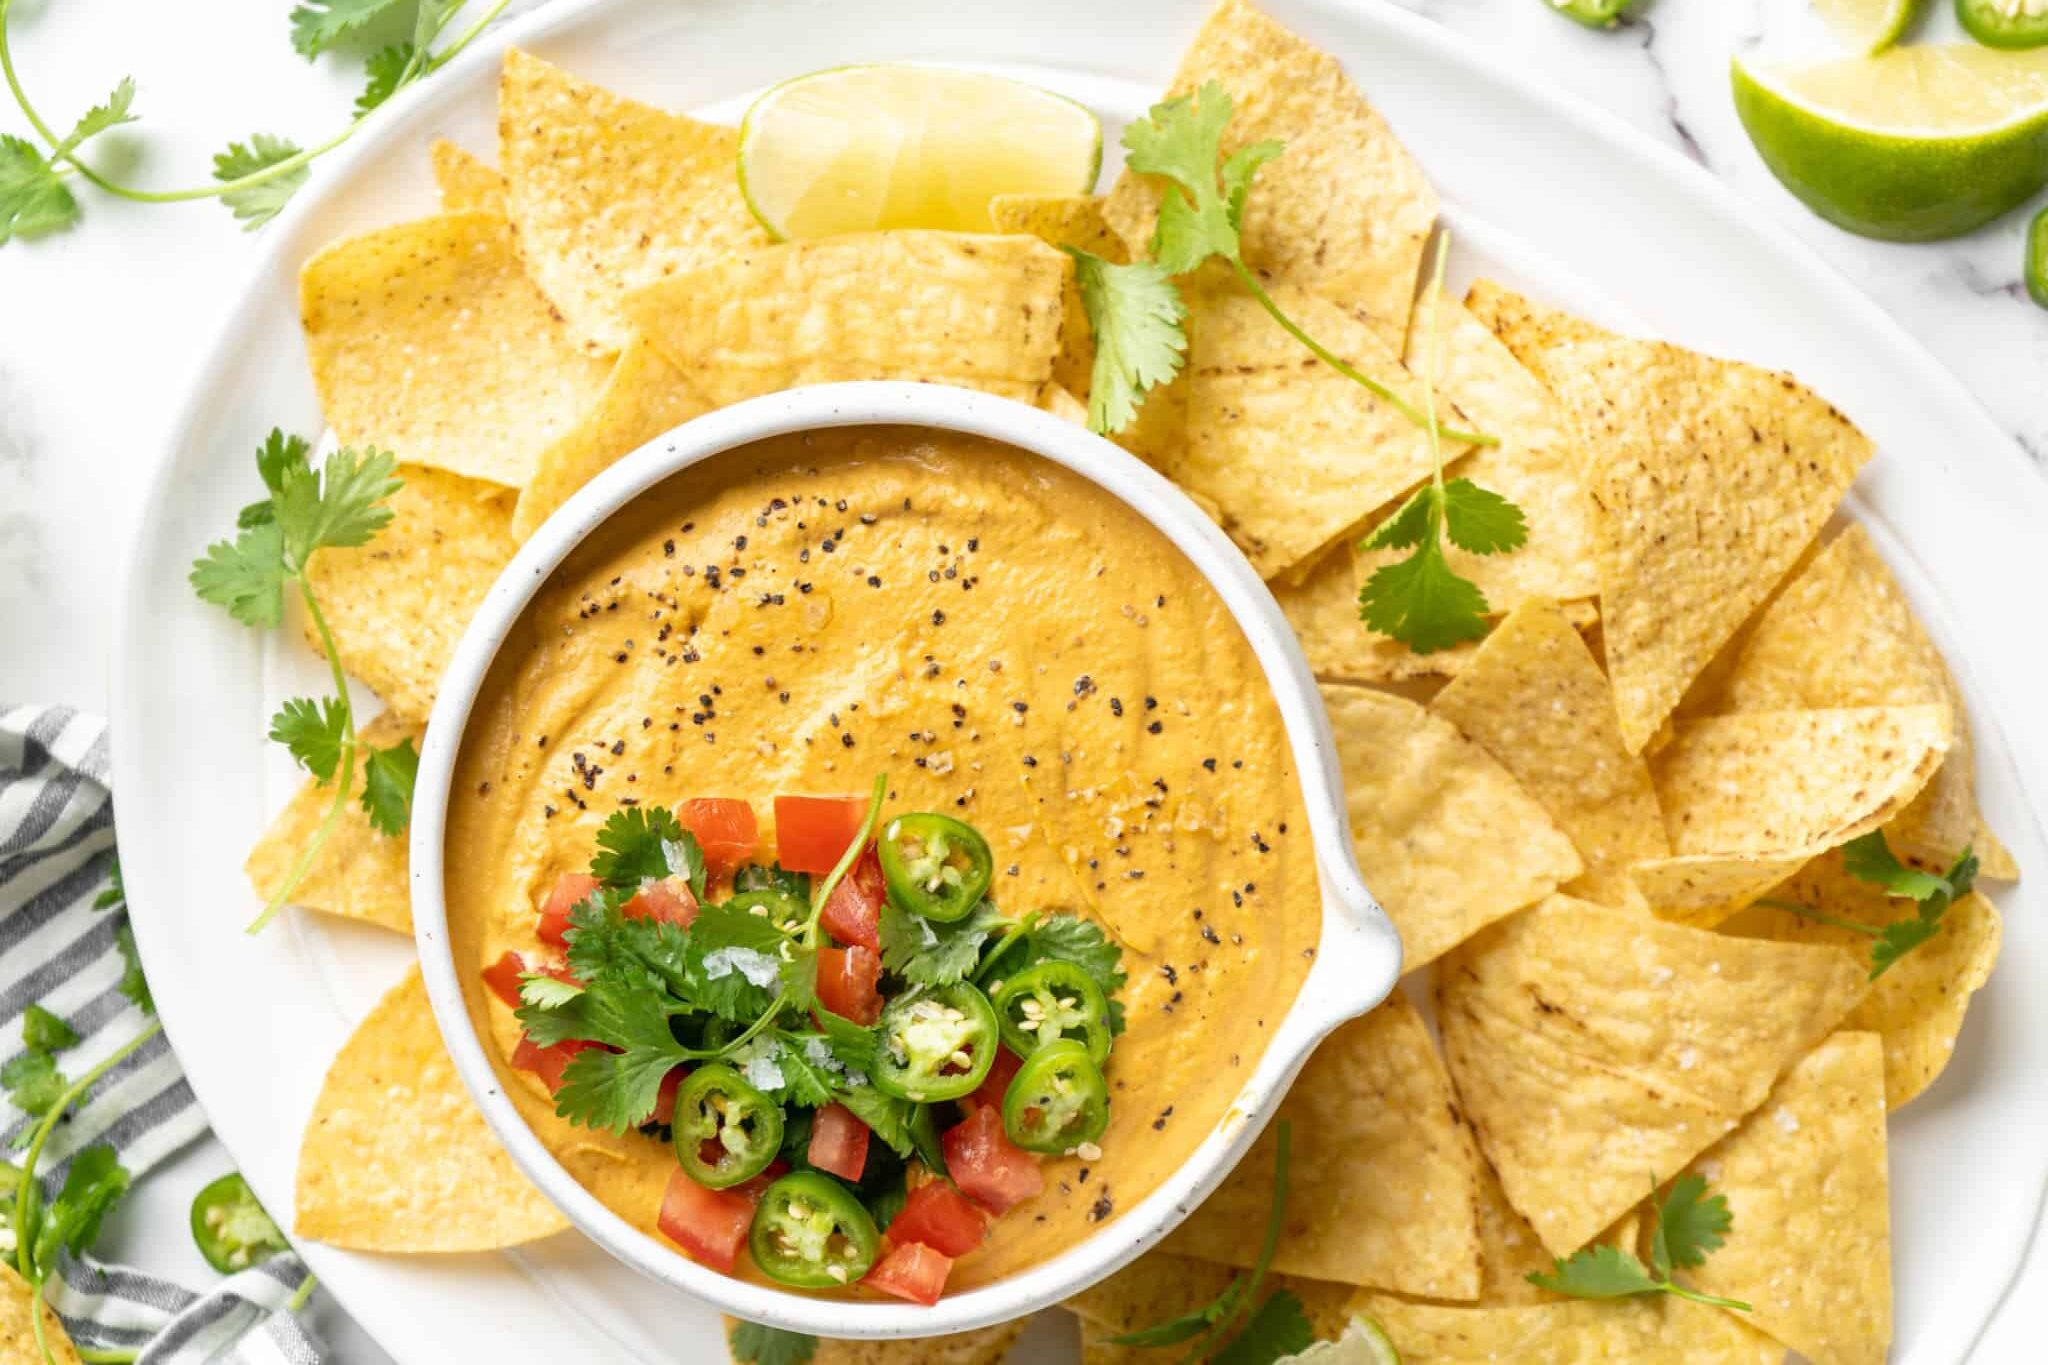 Dairy-free queso